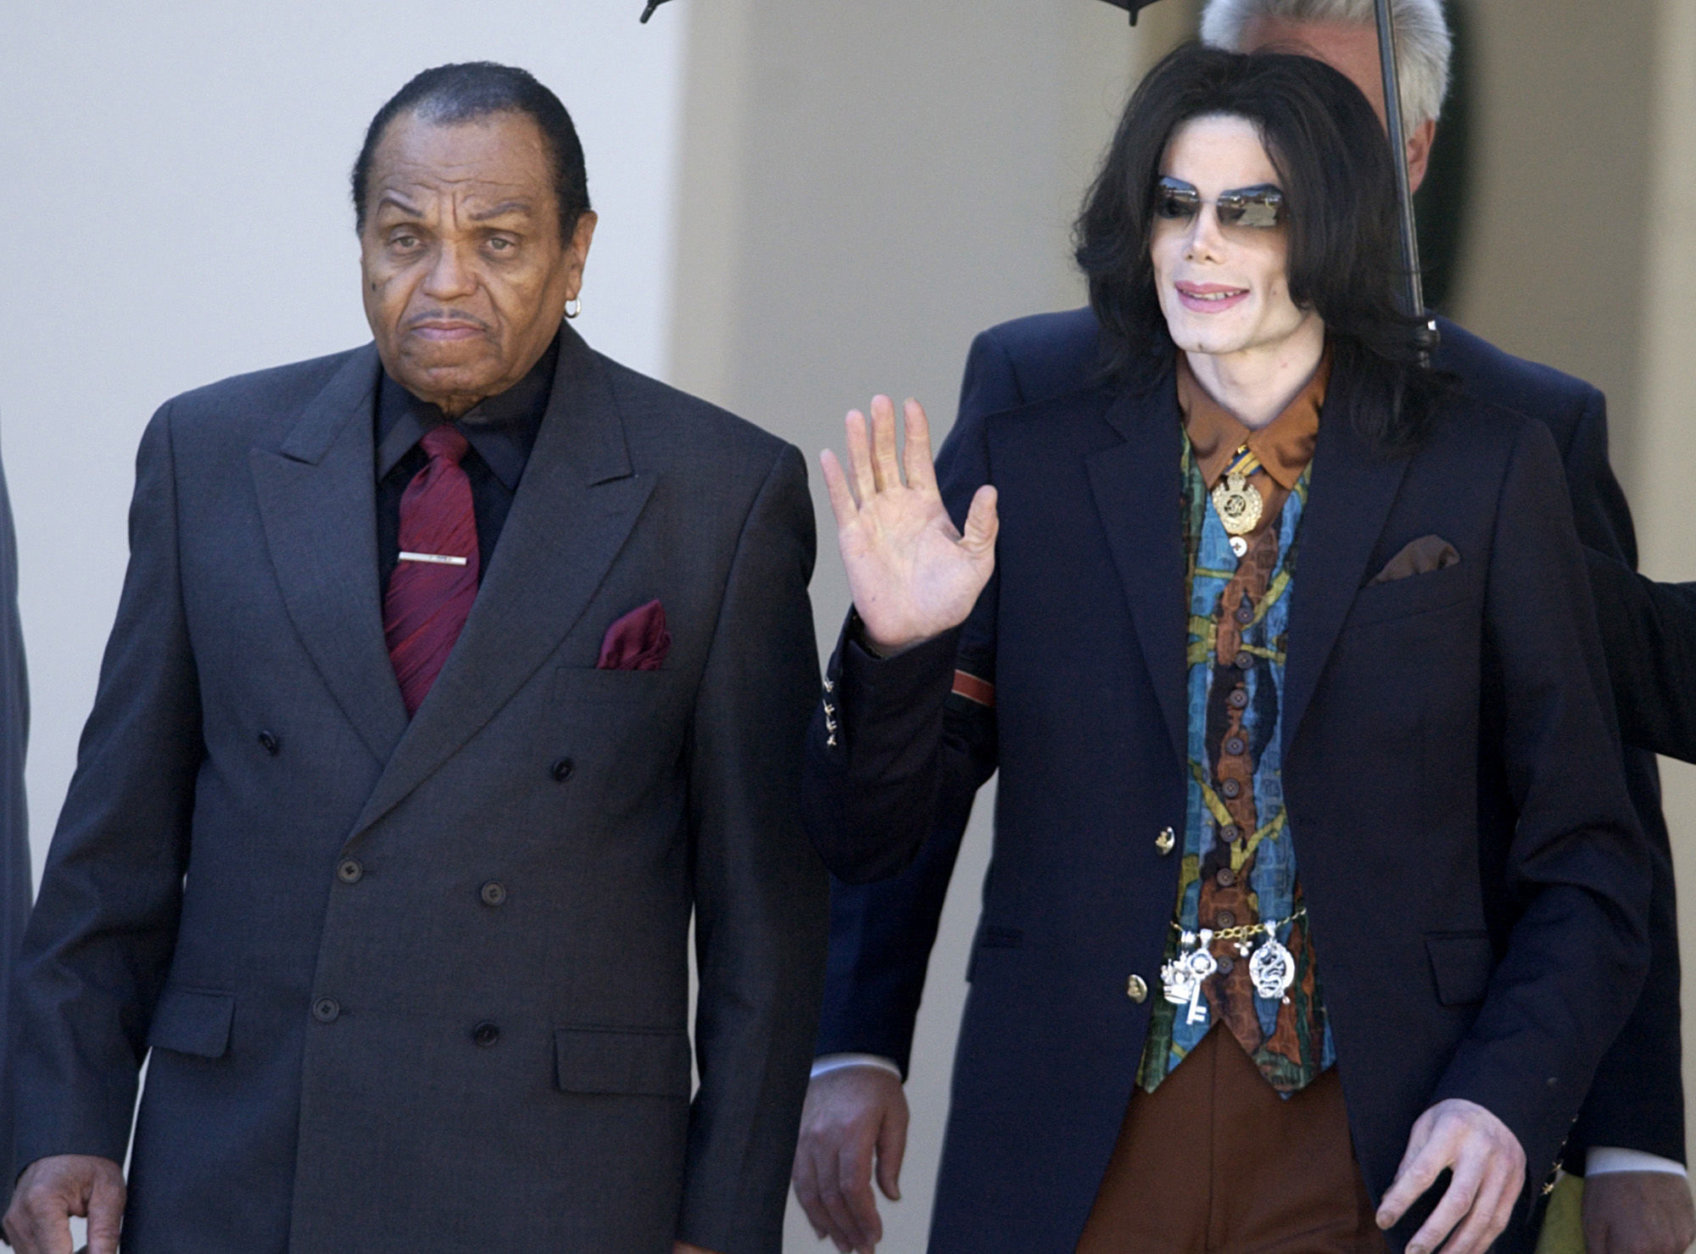 FILE - In this March 15, 2005 file photo, Pop star Michael Jackson leaves the Santa Barbara County Courthouse with his father, Joe, left, in Santa Maria, Calif., following a day of testimony in Jackson's trial on charges of child molestation. Jackson, 50, died in Los Angeles on Thursday, June 25, 2009. (AP Photo/Michael A. Mariant, file)